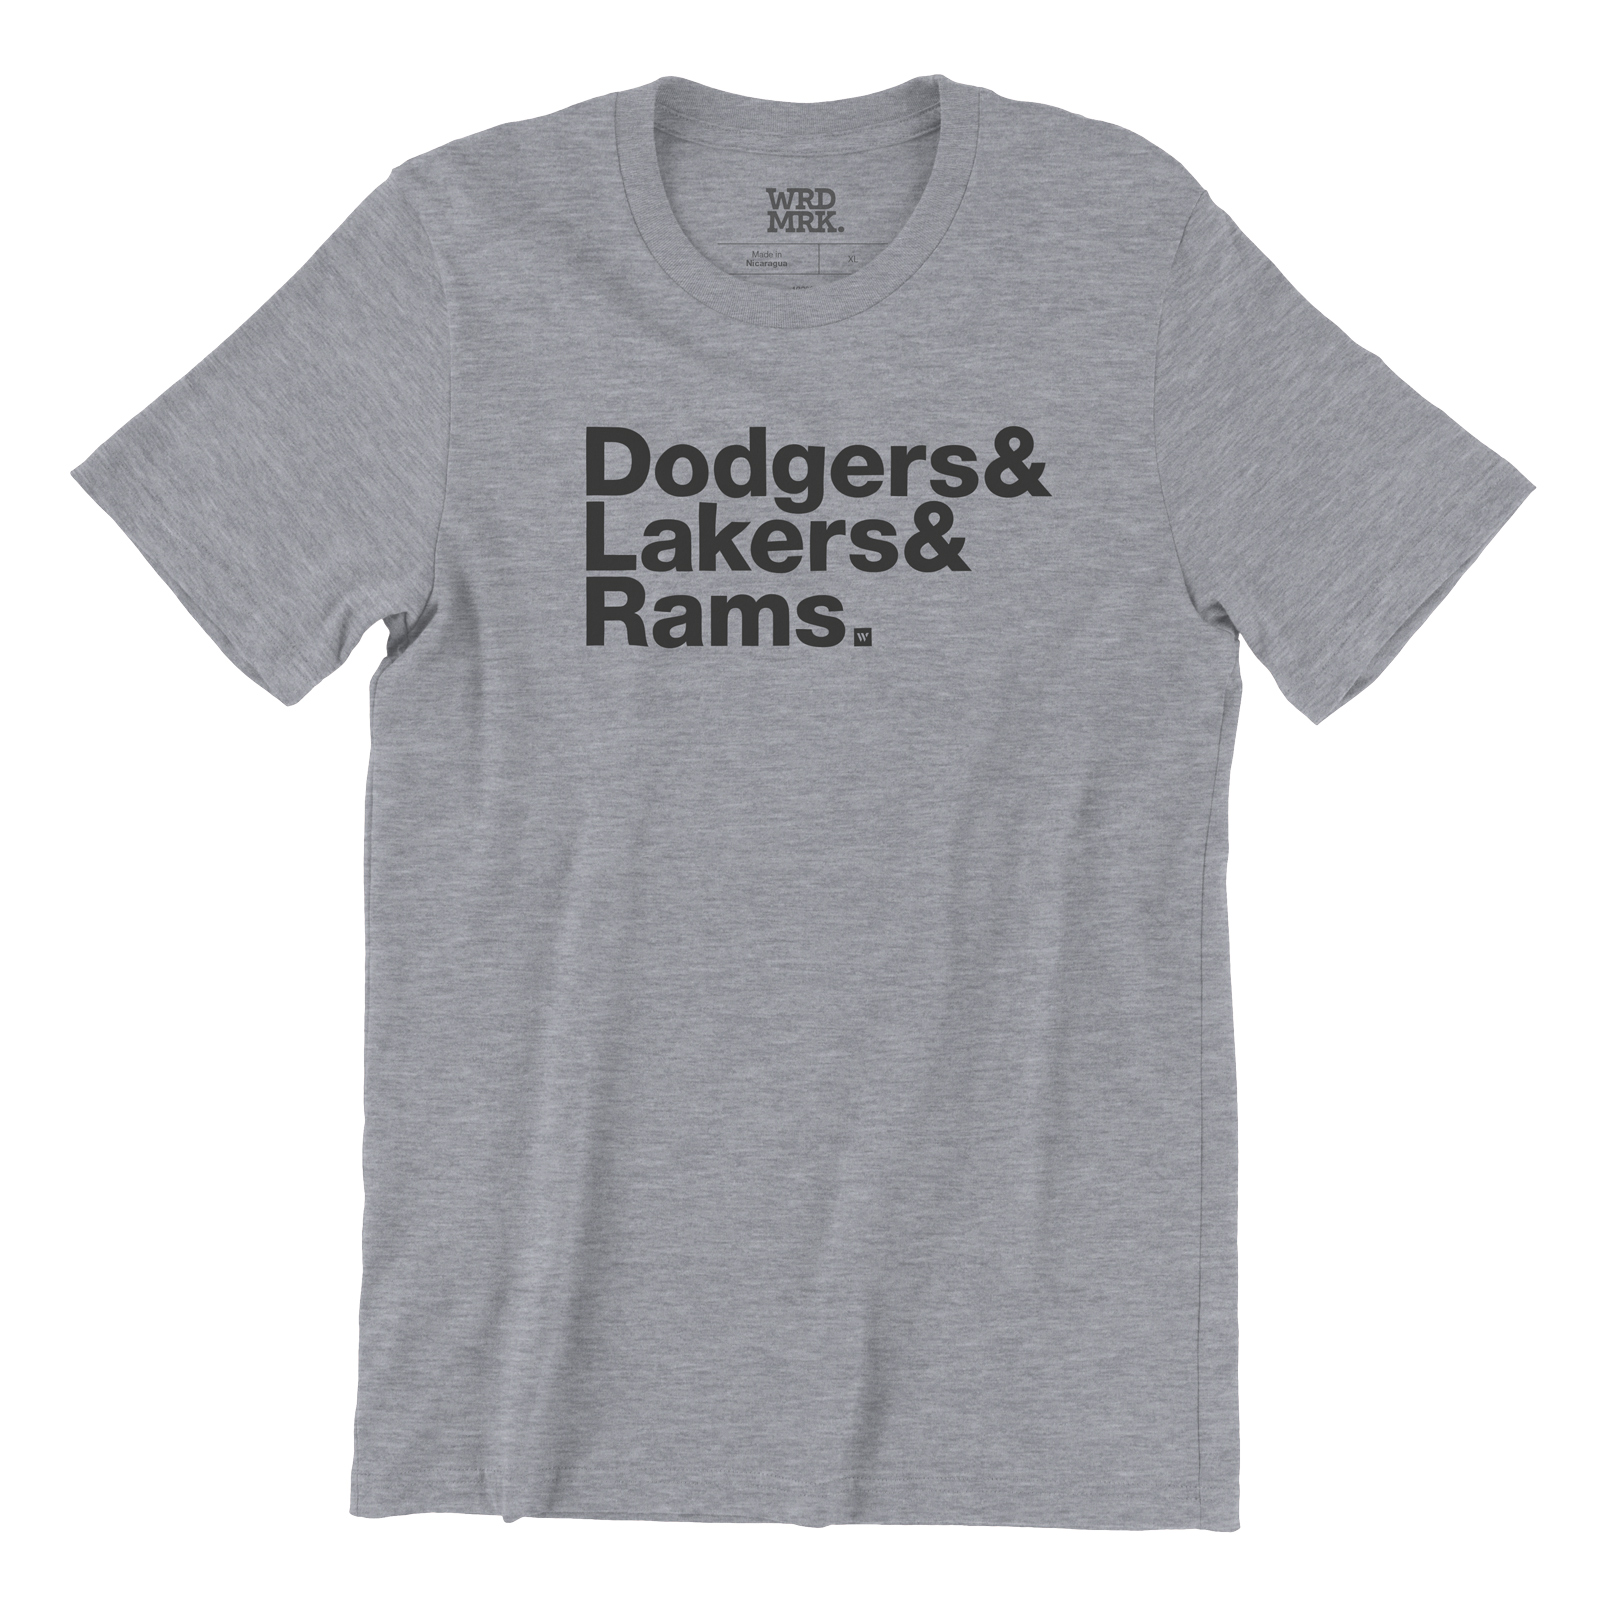 Dodgers & Lakers & Rams. T-Shirt - Wrdmrk - Los Angeles Sports Teams Ampersand - Short Sleeve Cotton Tee (Gray Heather, 4XL)